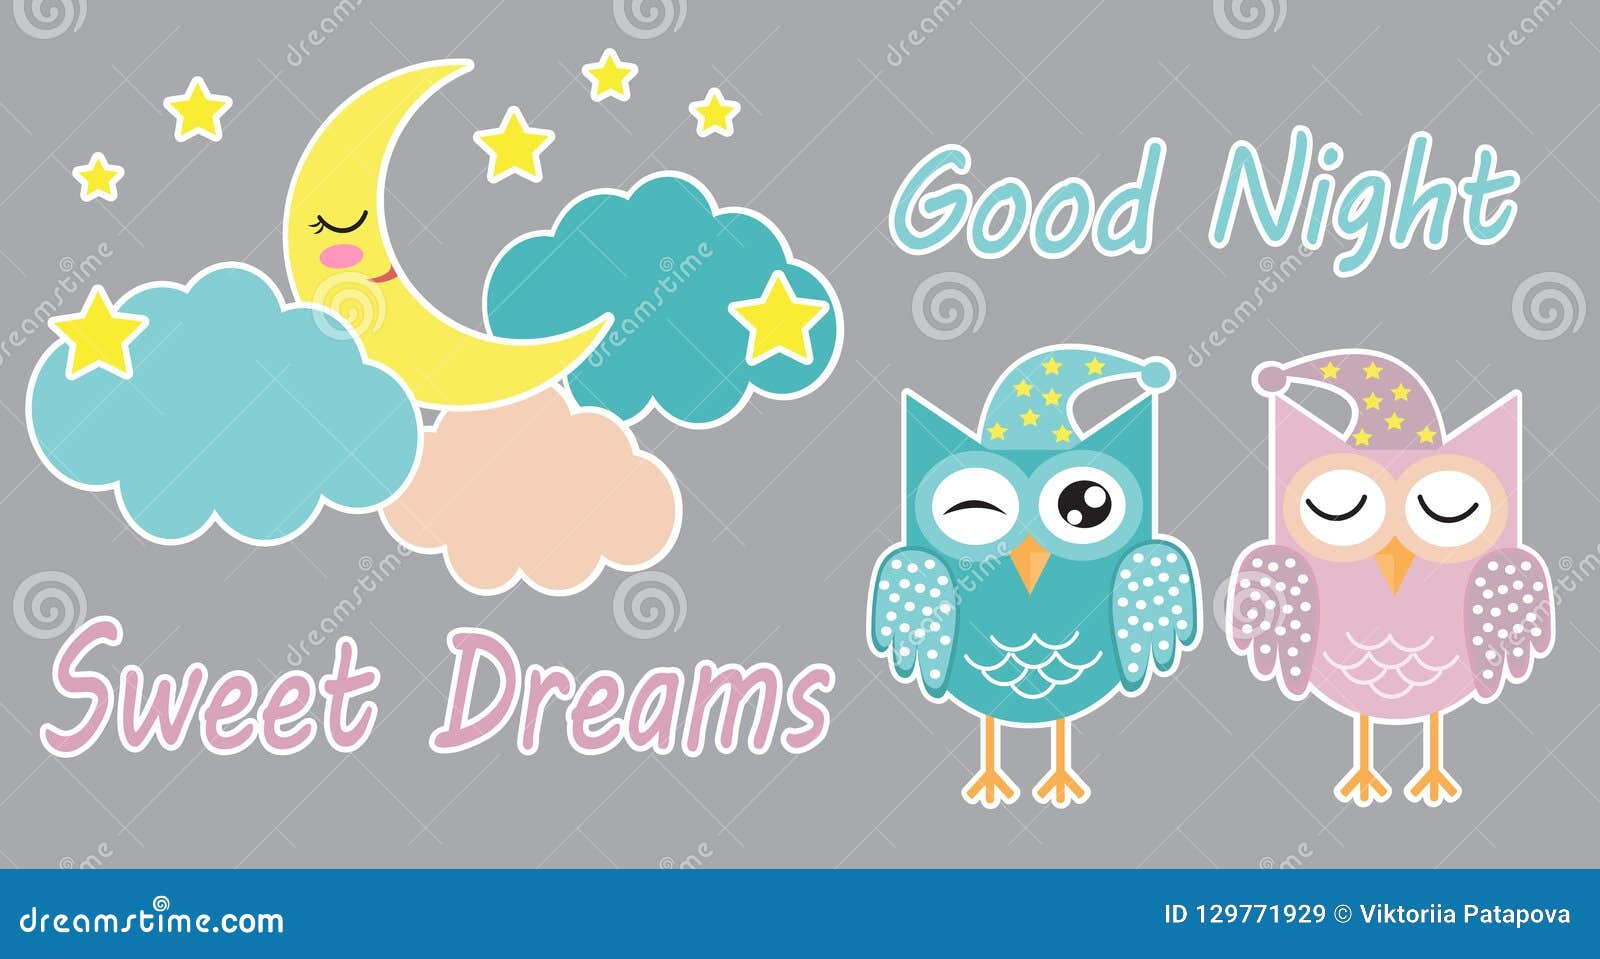 Good Night and Sweet Dreams Cute Set of Stickers with Sleeping ...